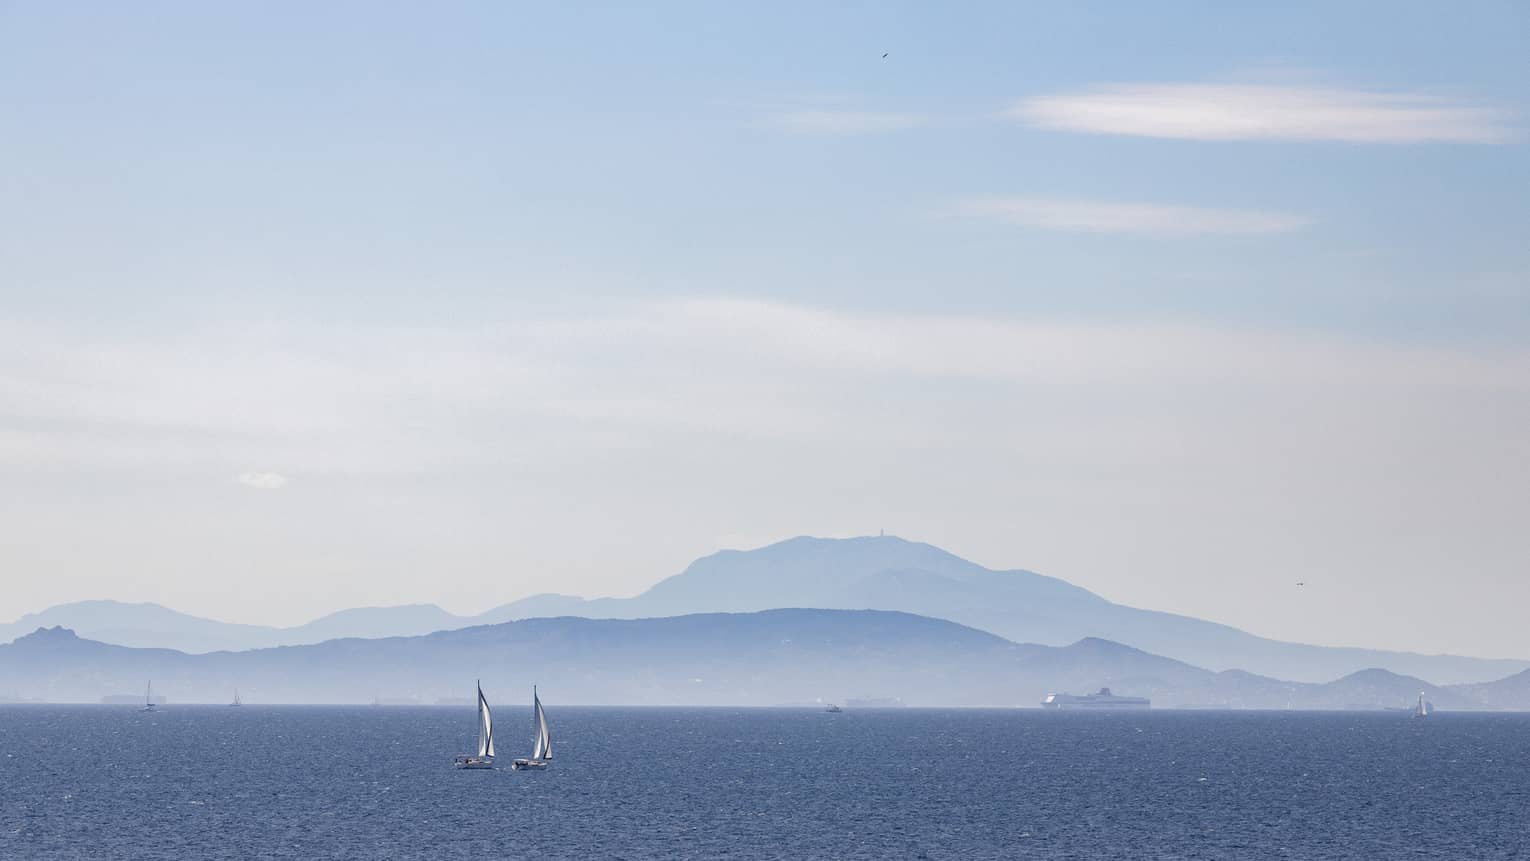 Two sailboats on blue ocean with blue-grey mountain range in the background 